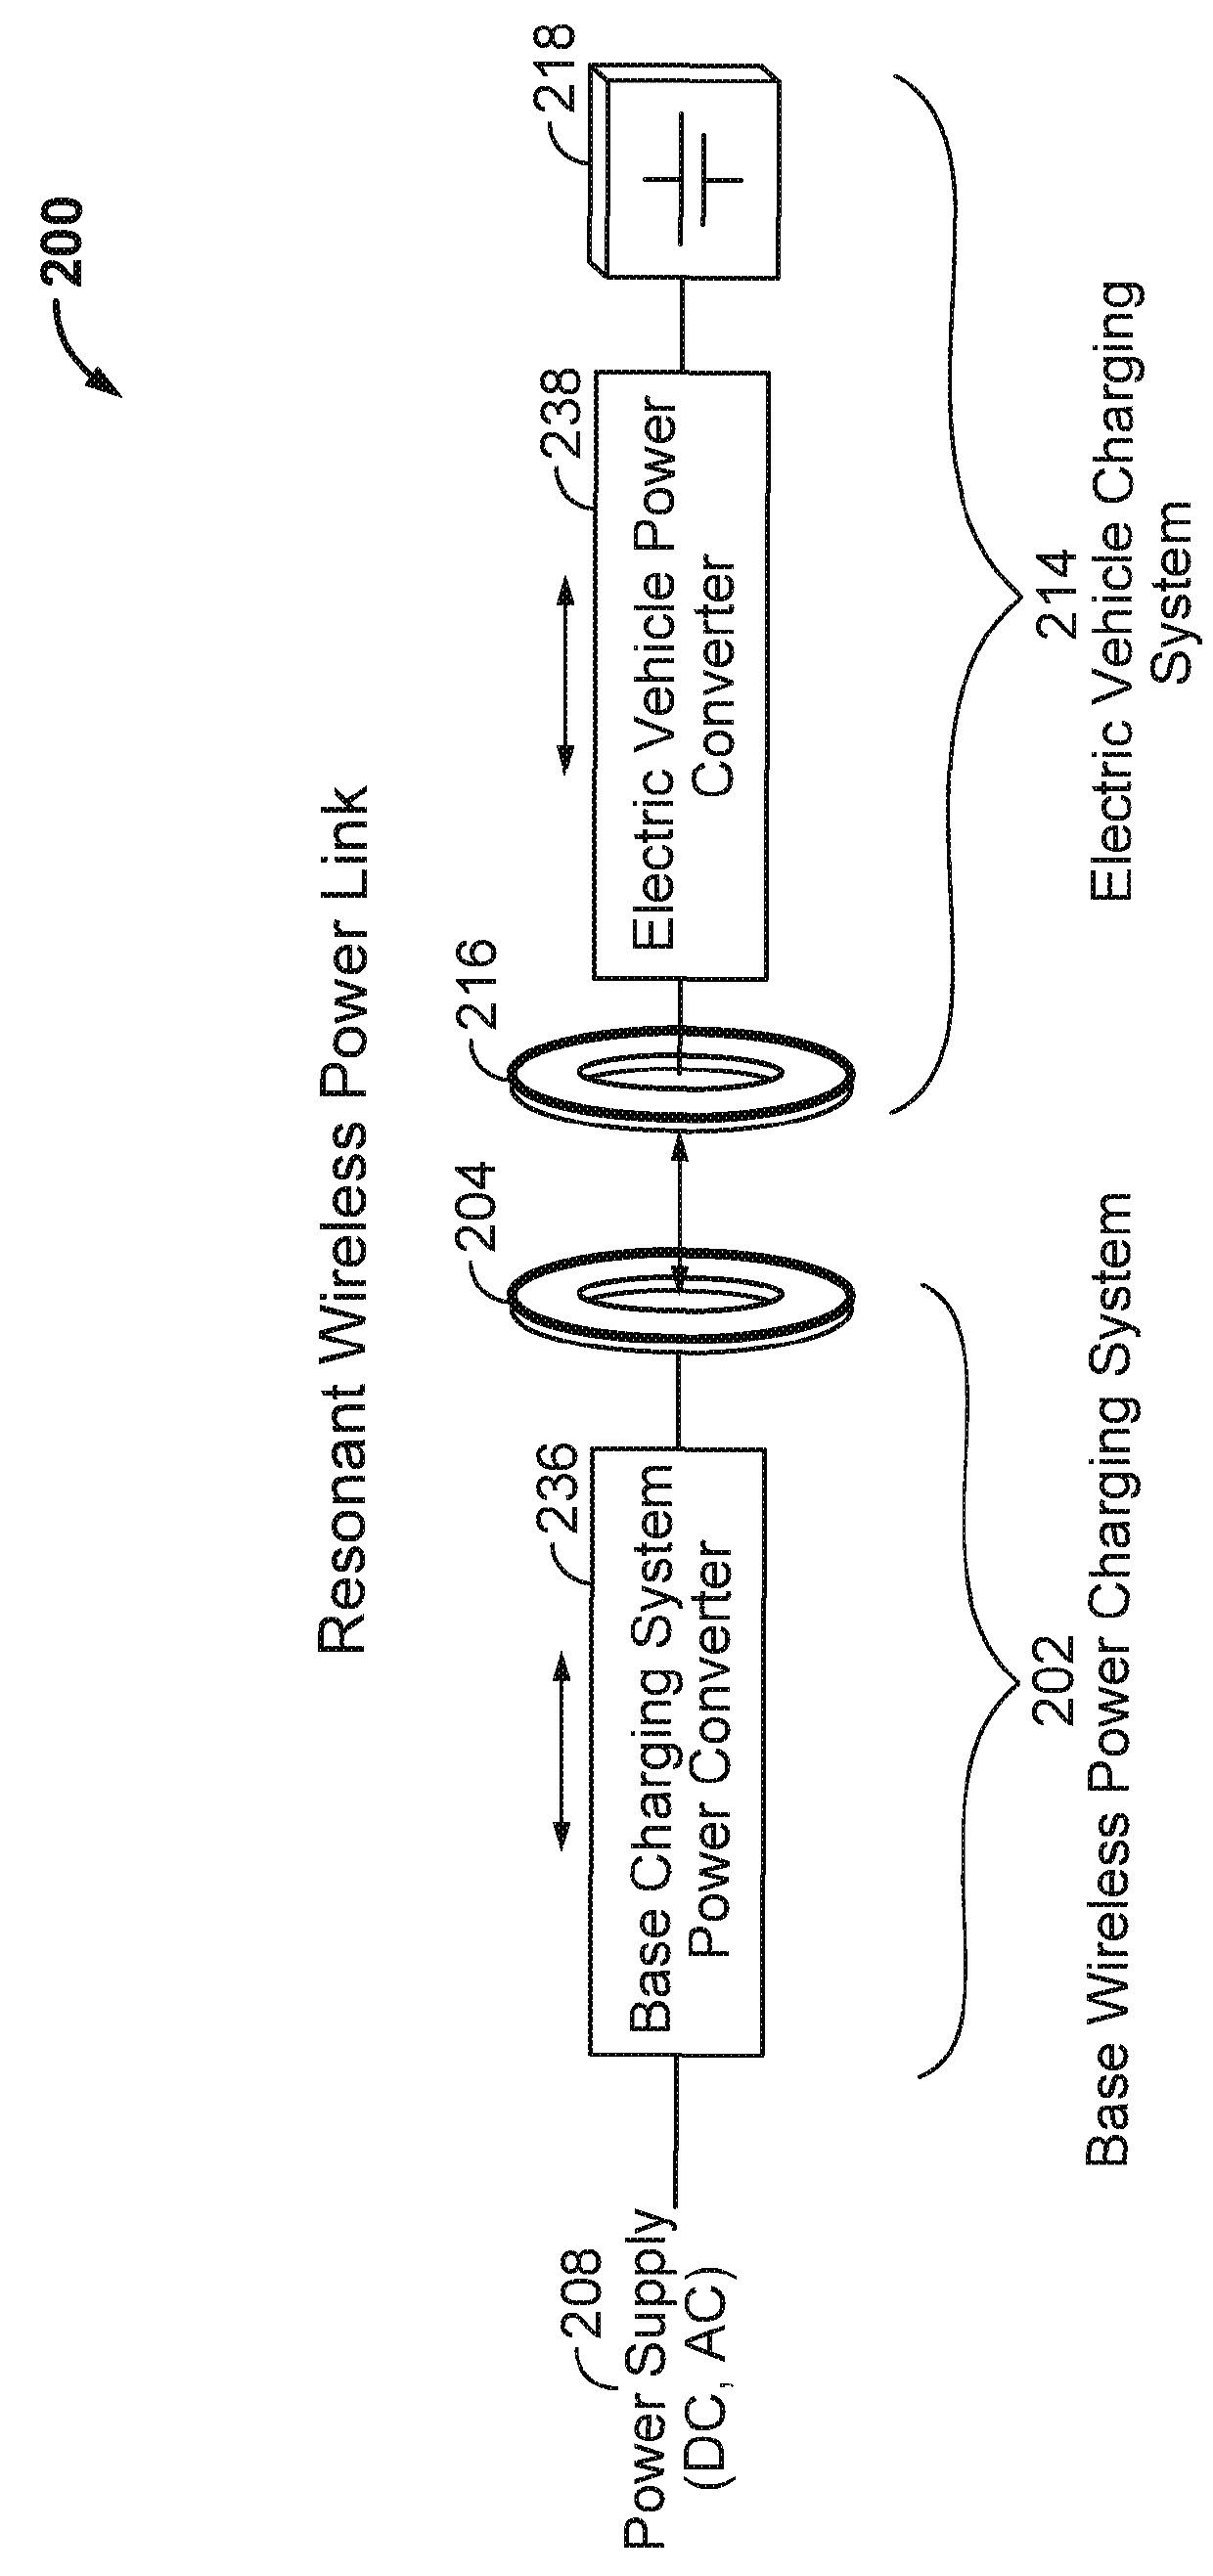 Wireless energy transfer and continuous radio station signal coexistence